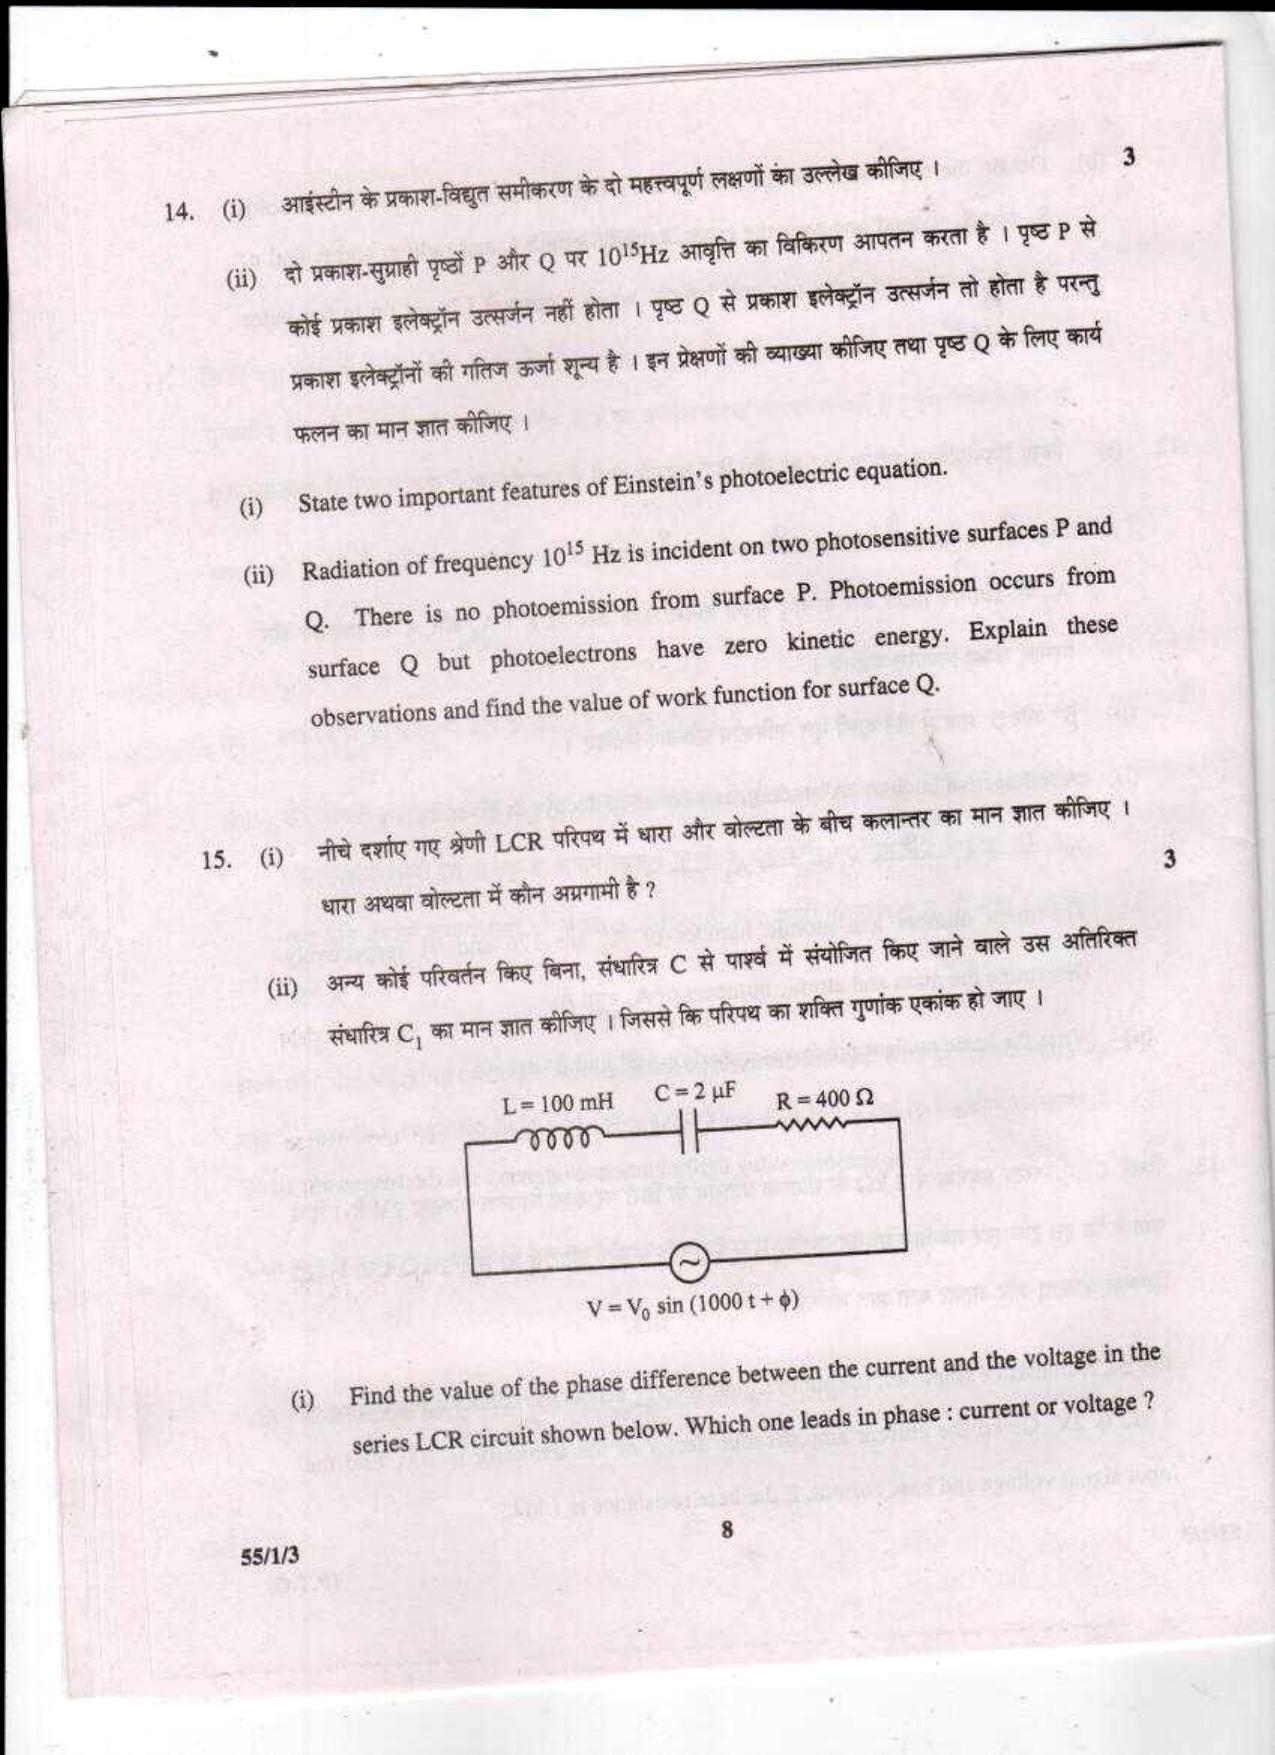 CBSE Class 12 Physics (Theory) SET 3-Delhi-12 2017 Question Paper - Page 8